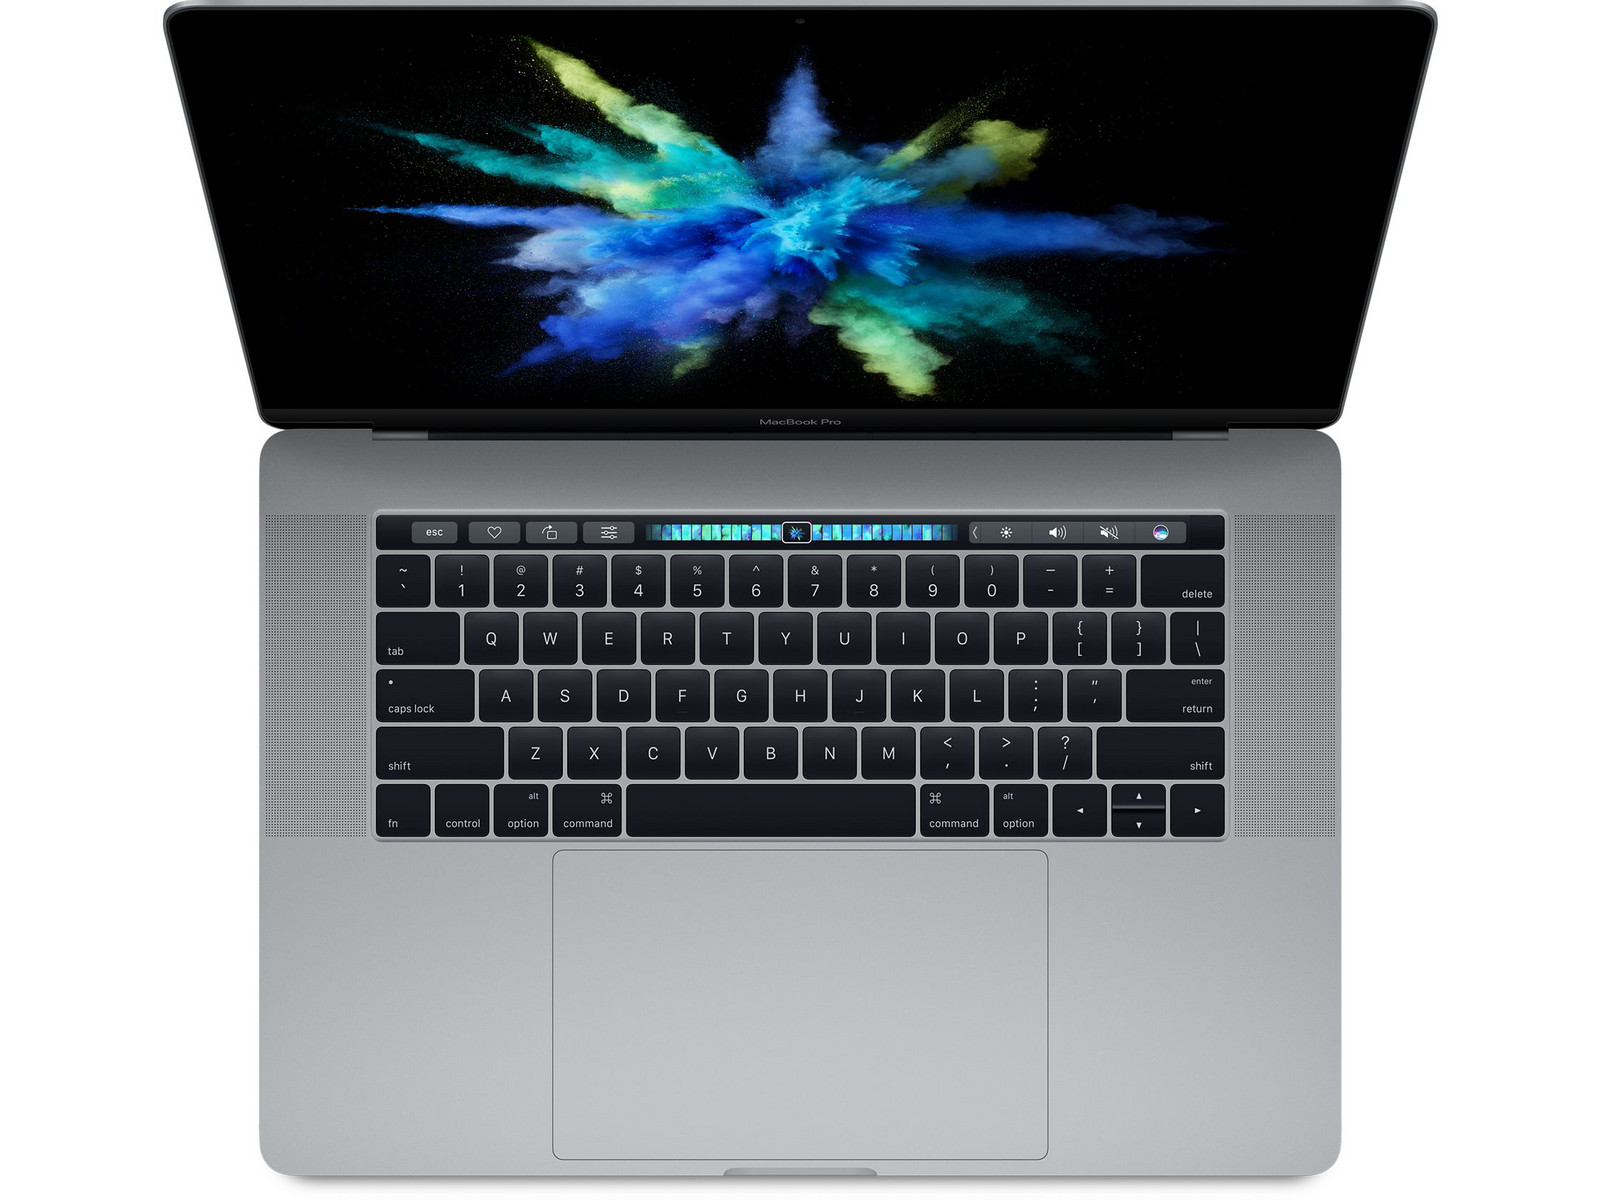 Apple MacBook Pro 15 (Late 2016, 2.7 GHz, 455) Notebook Review 